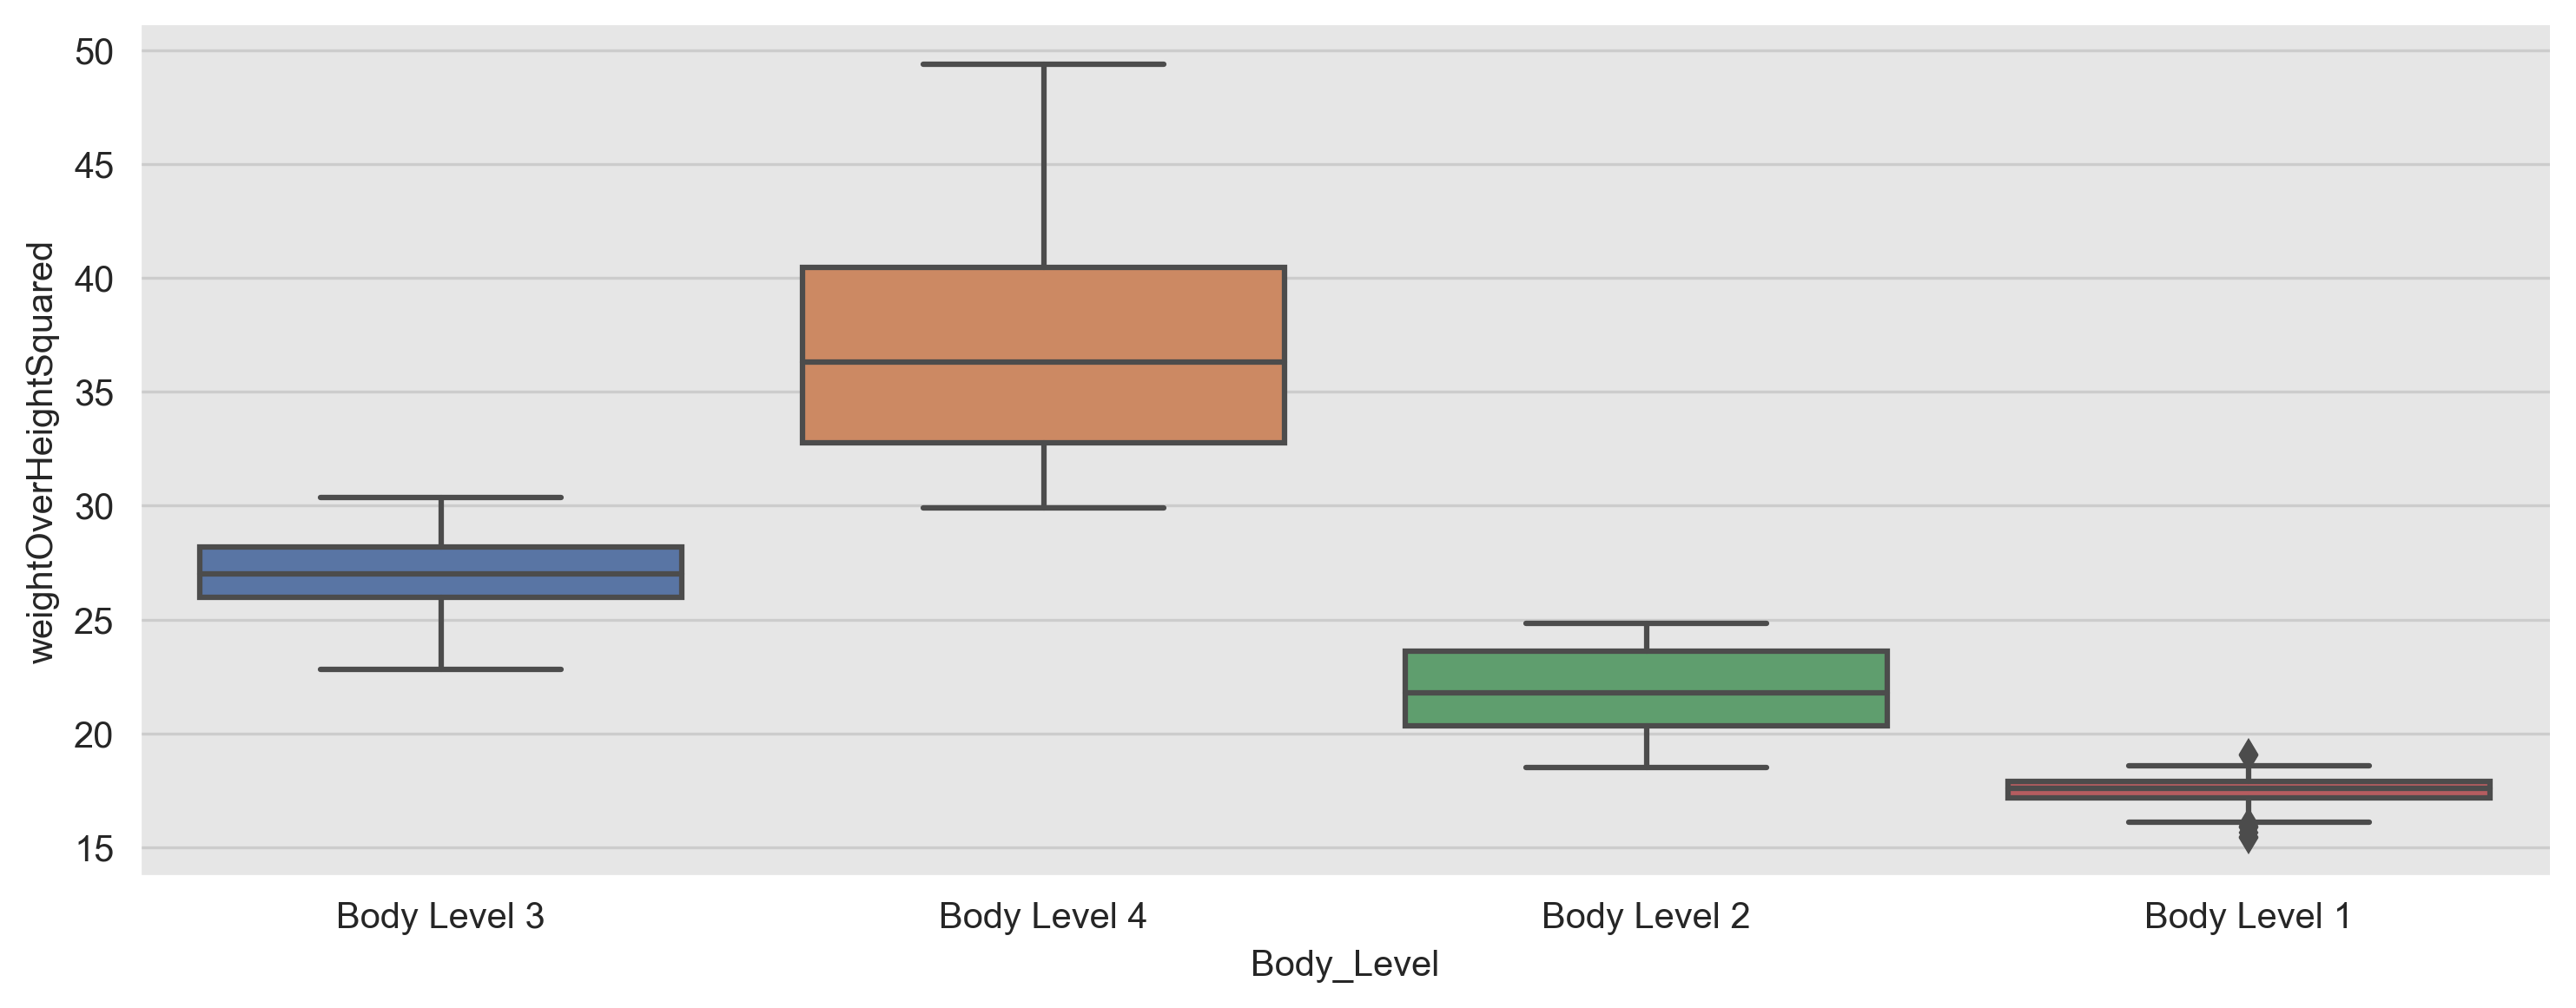 Body Level vs Weight over Height Squared